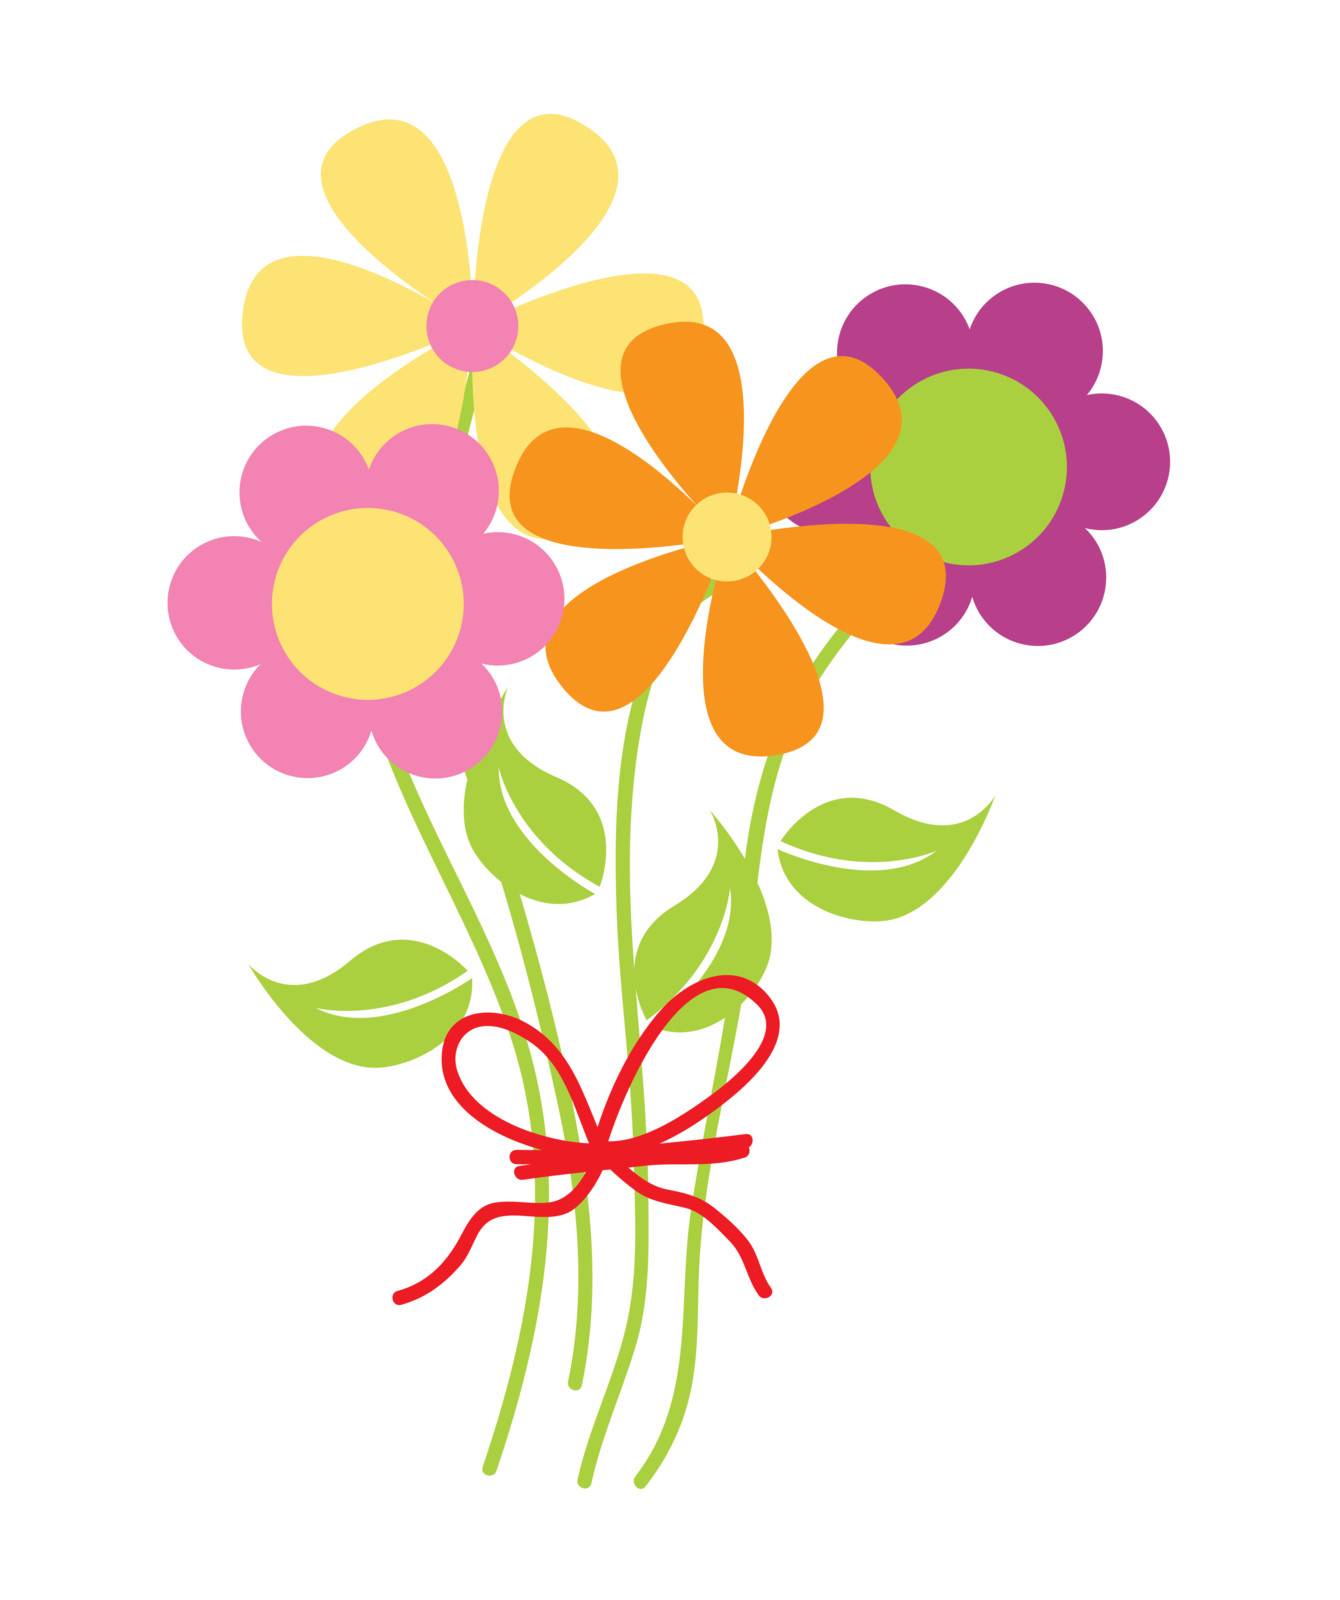 bouquet flowers over white background. vector illustration